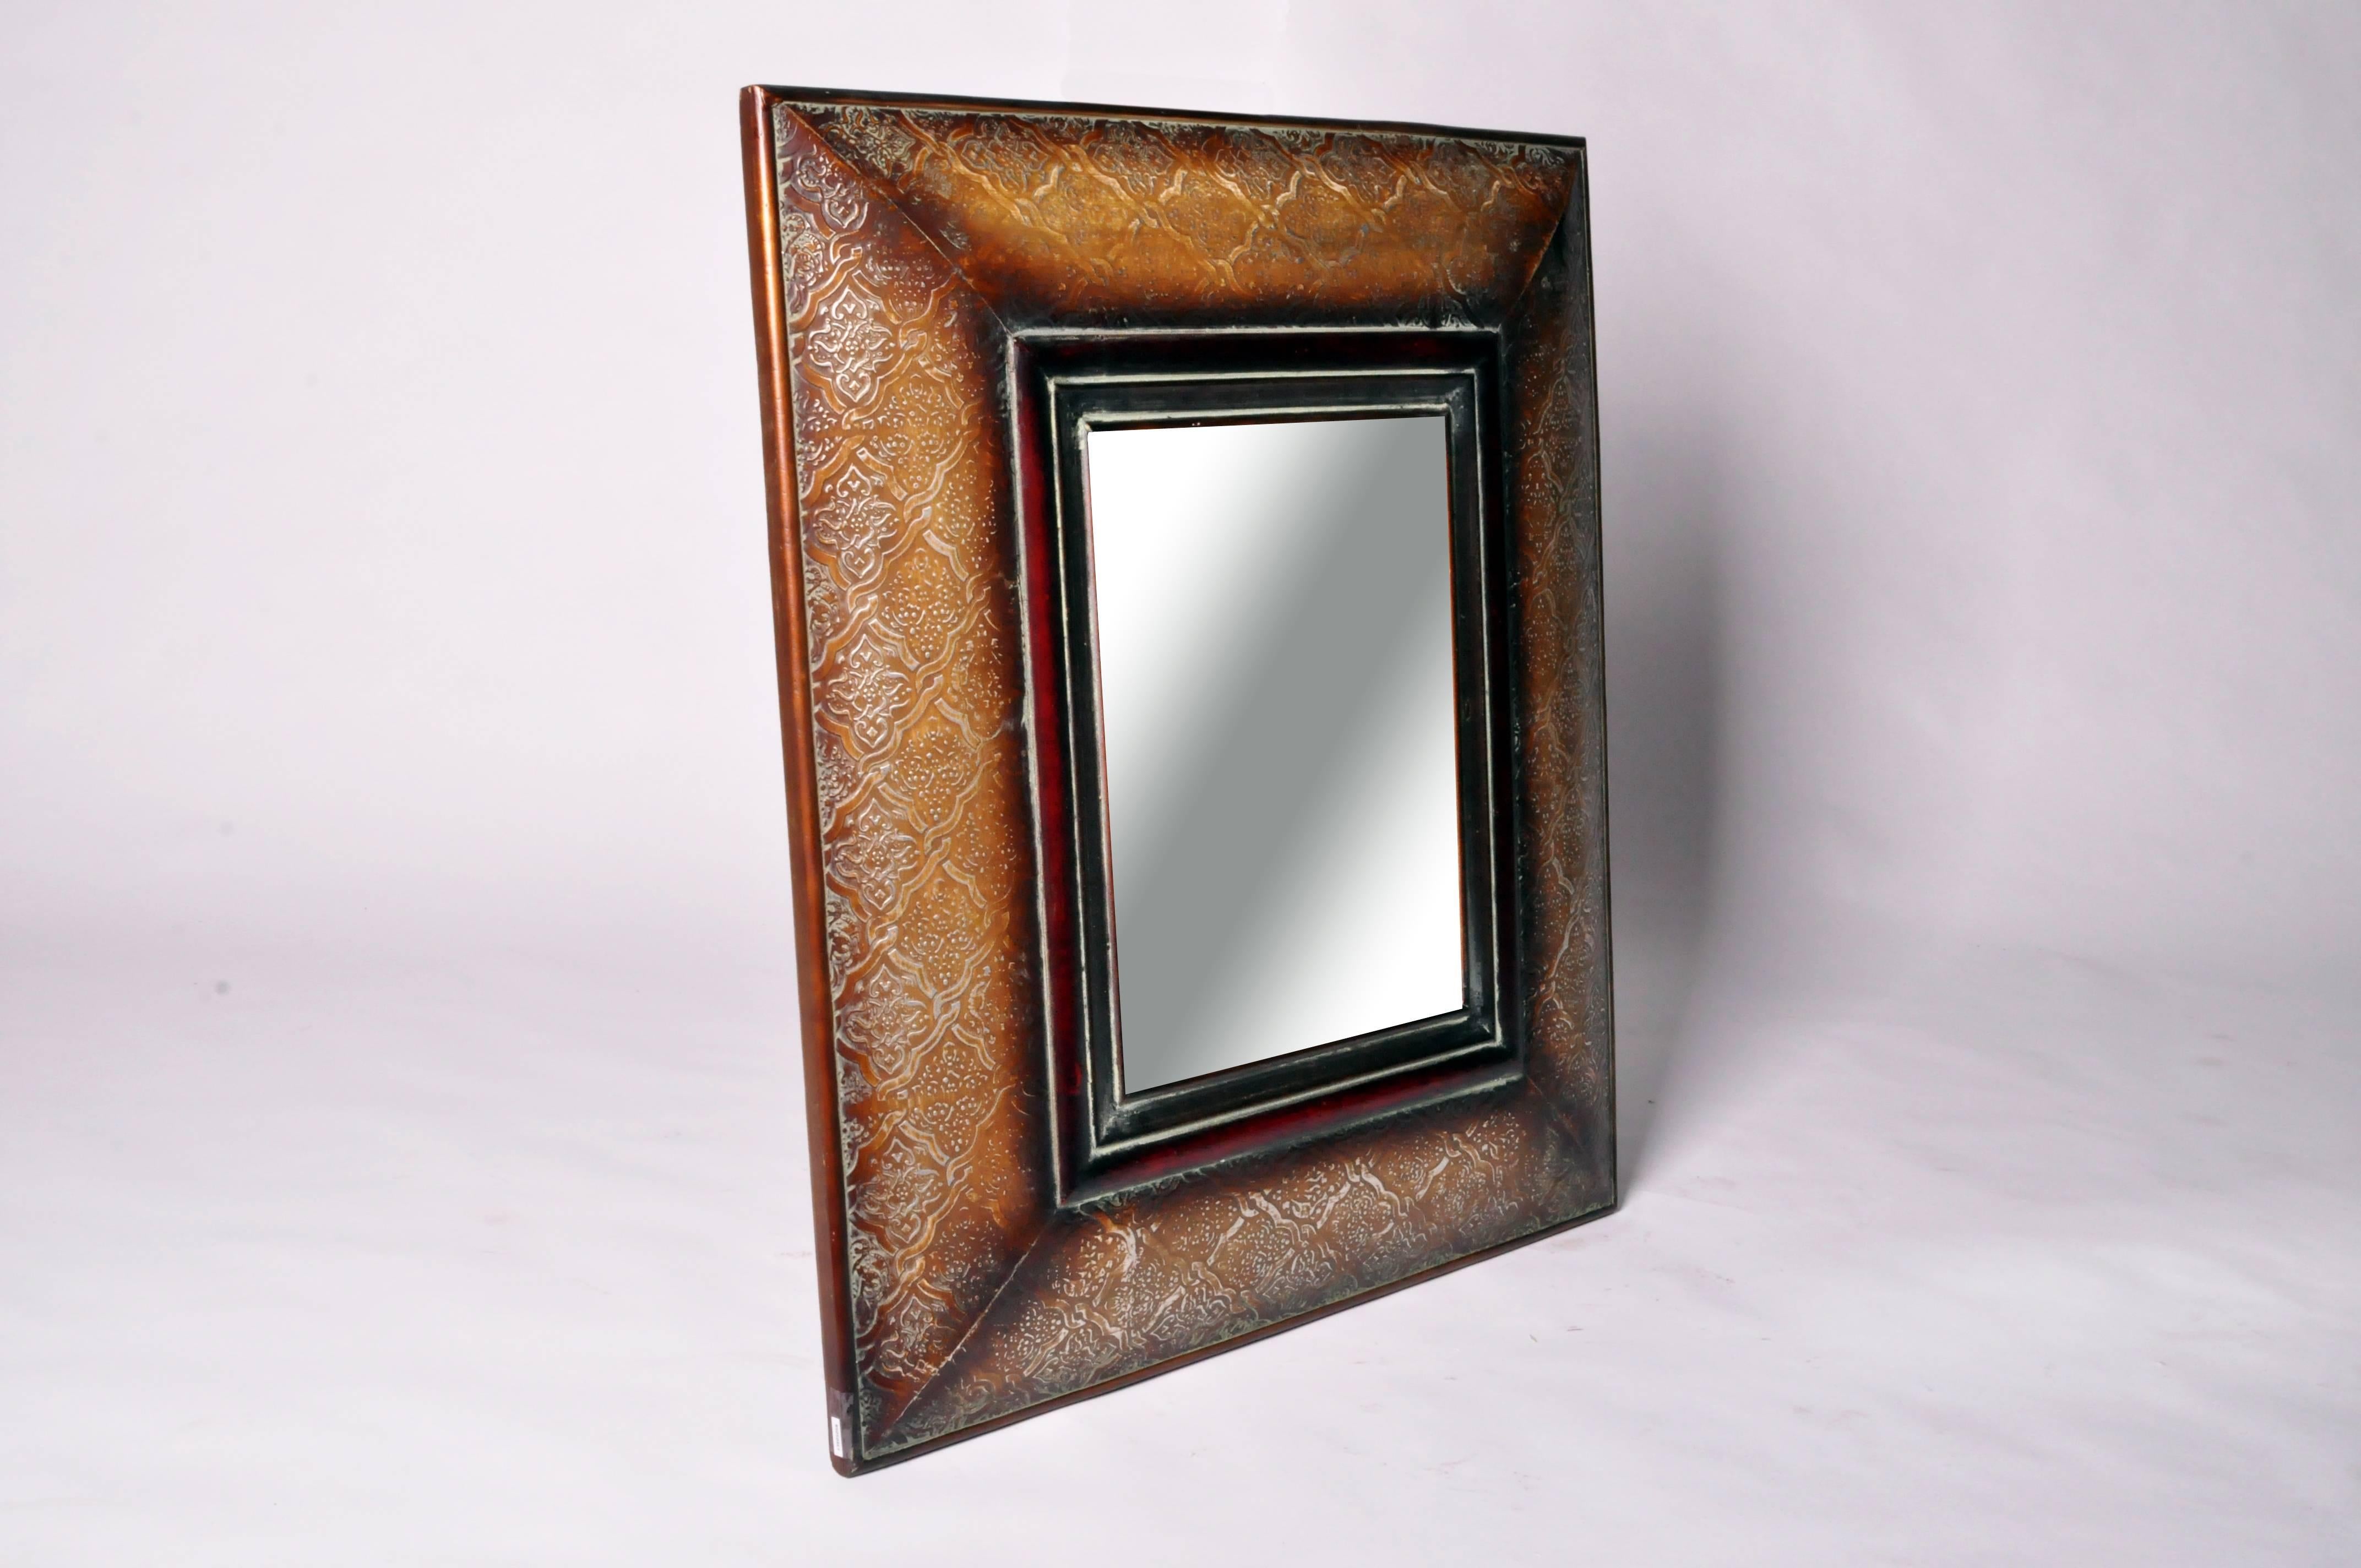 The rectangular frame is decorated with a beautifully detailed and textured quatrefoil design.